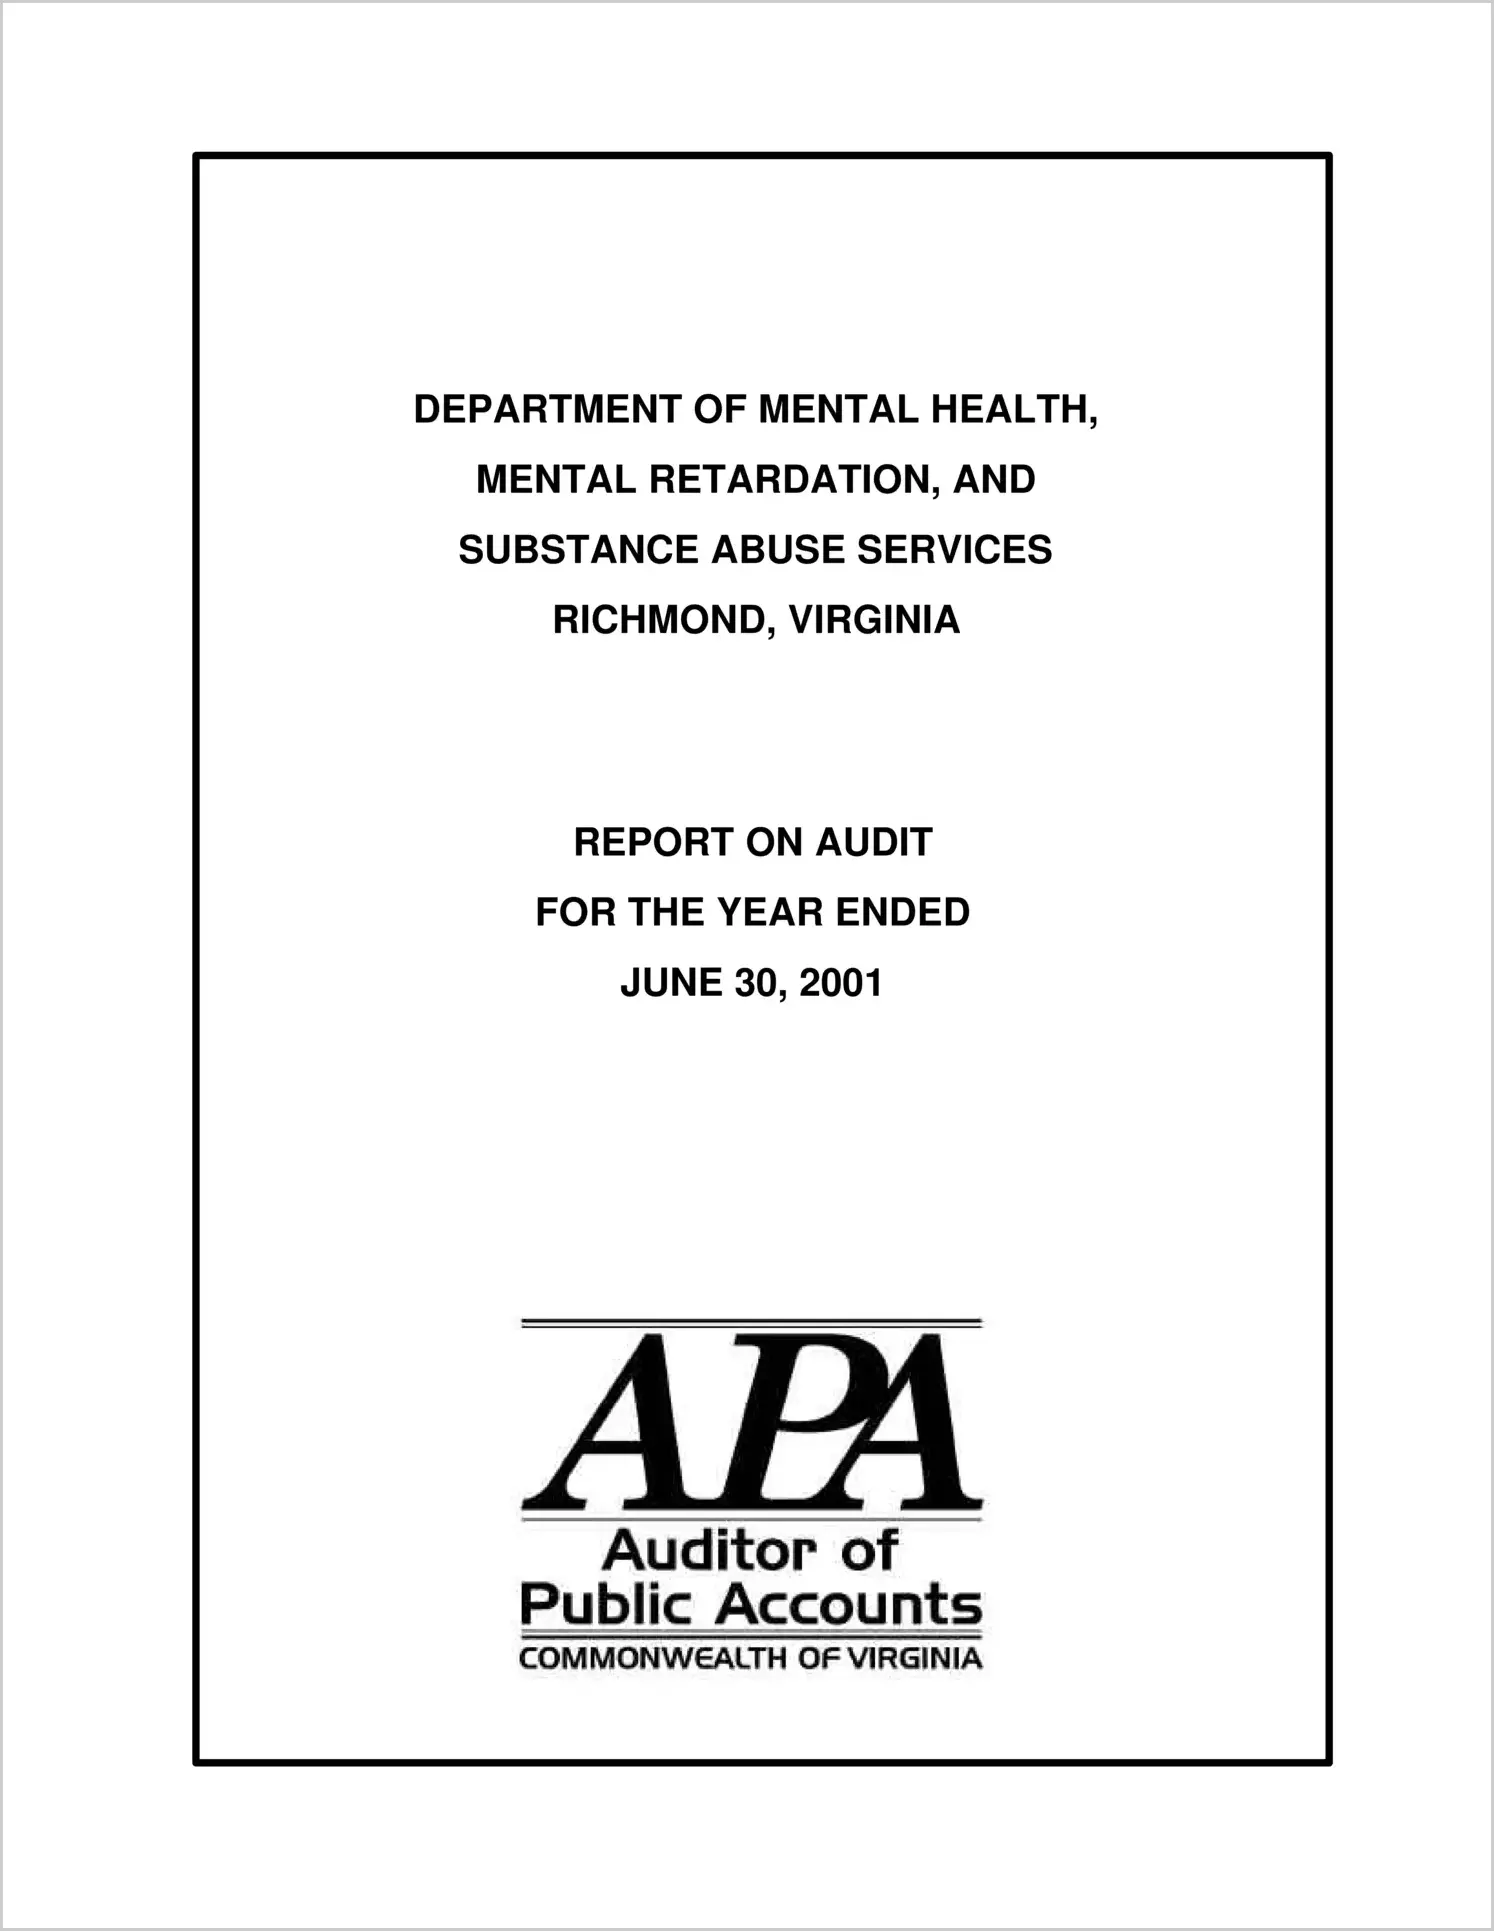 Department of Mental Health, Mental Retardation, and Substance Abuse Services for the year ended June 30, 2001